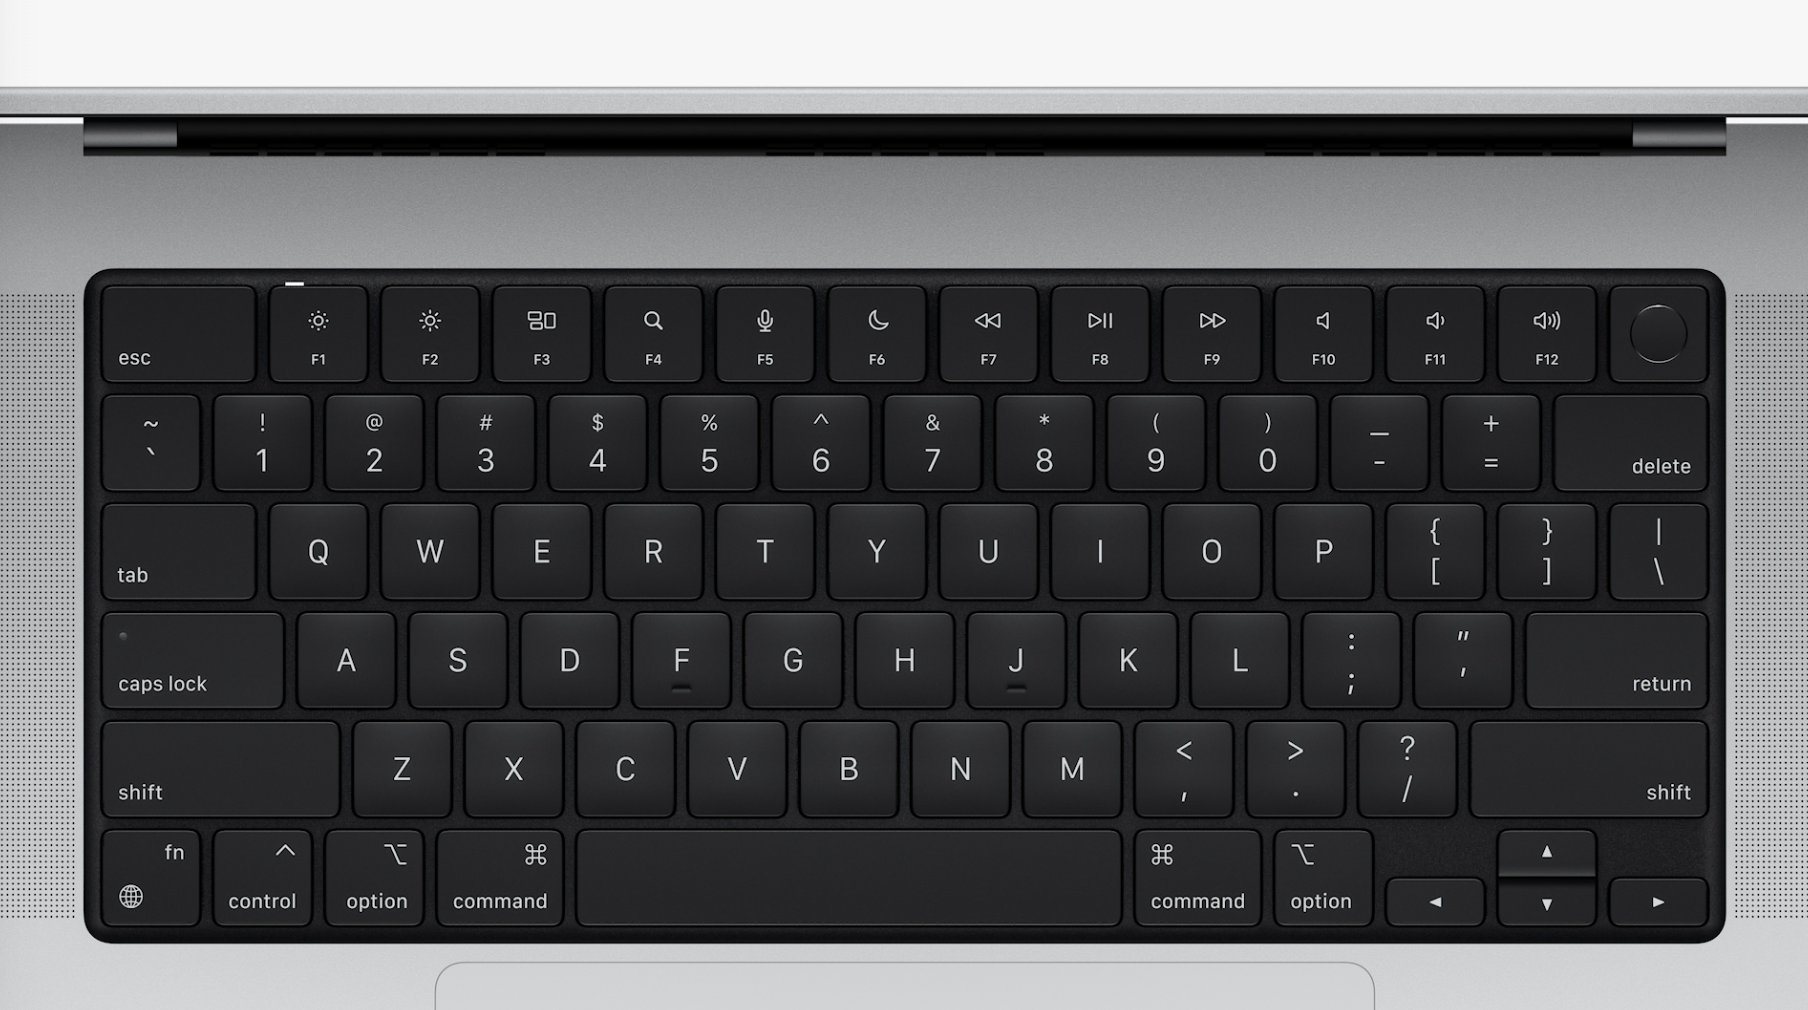 Keyboard of the new late 2021 MacBook Pro